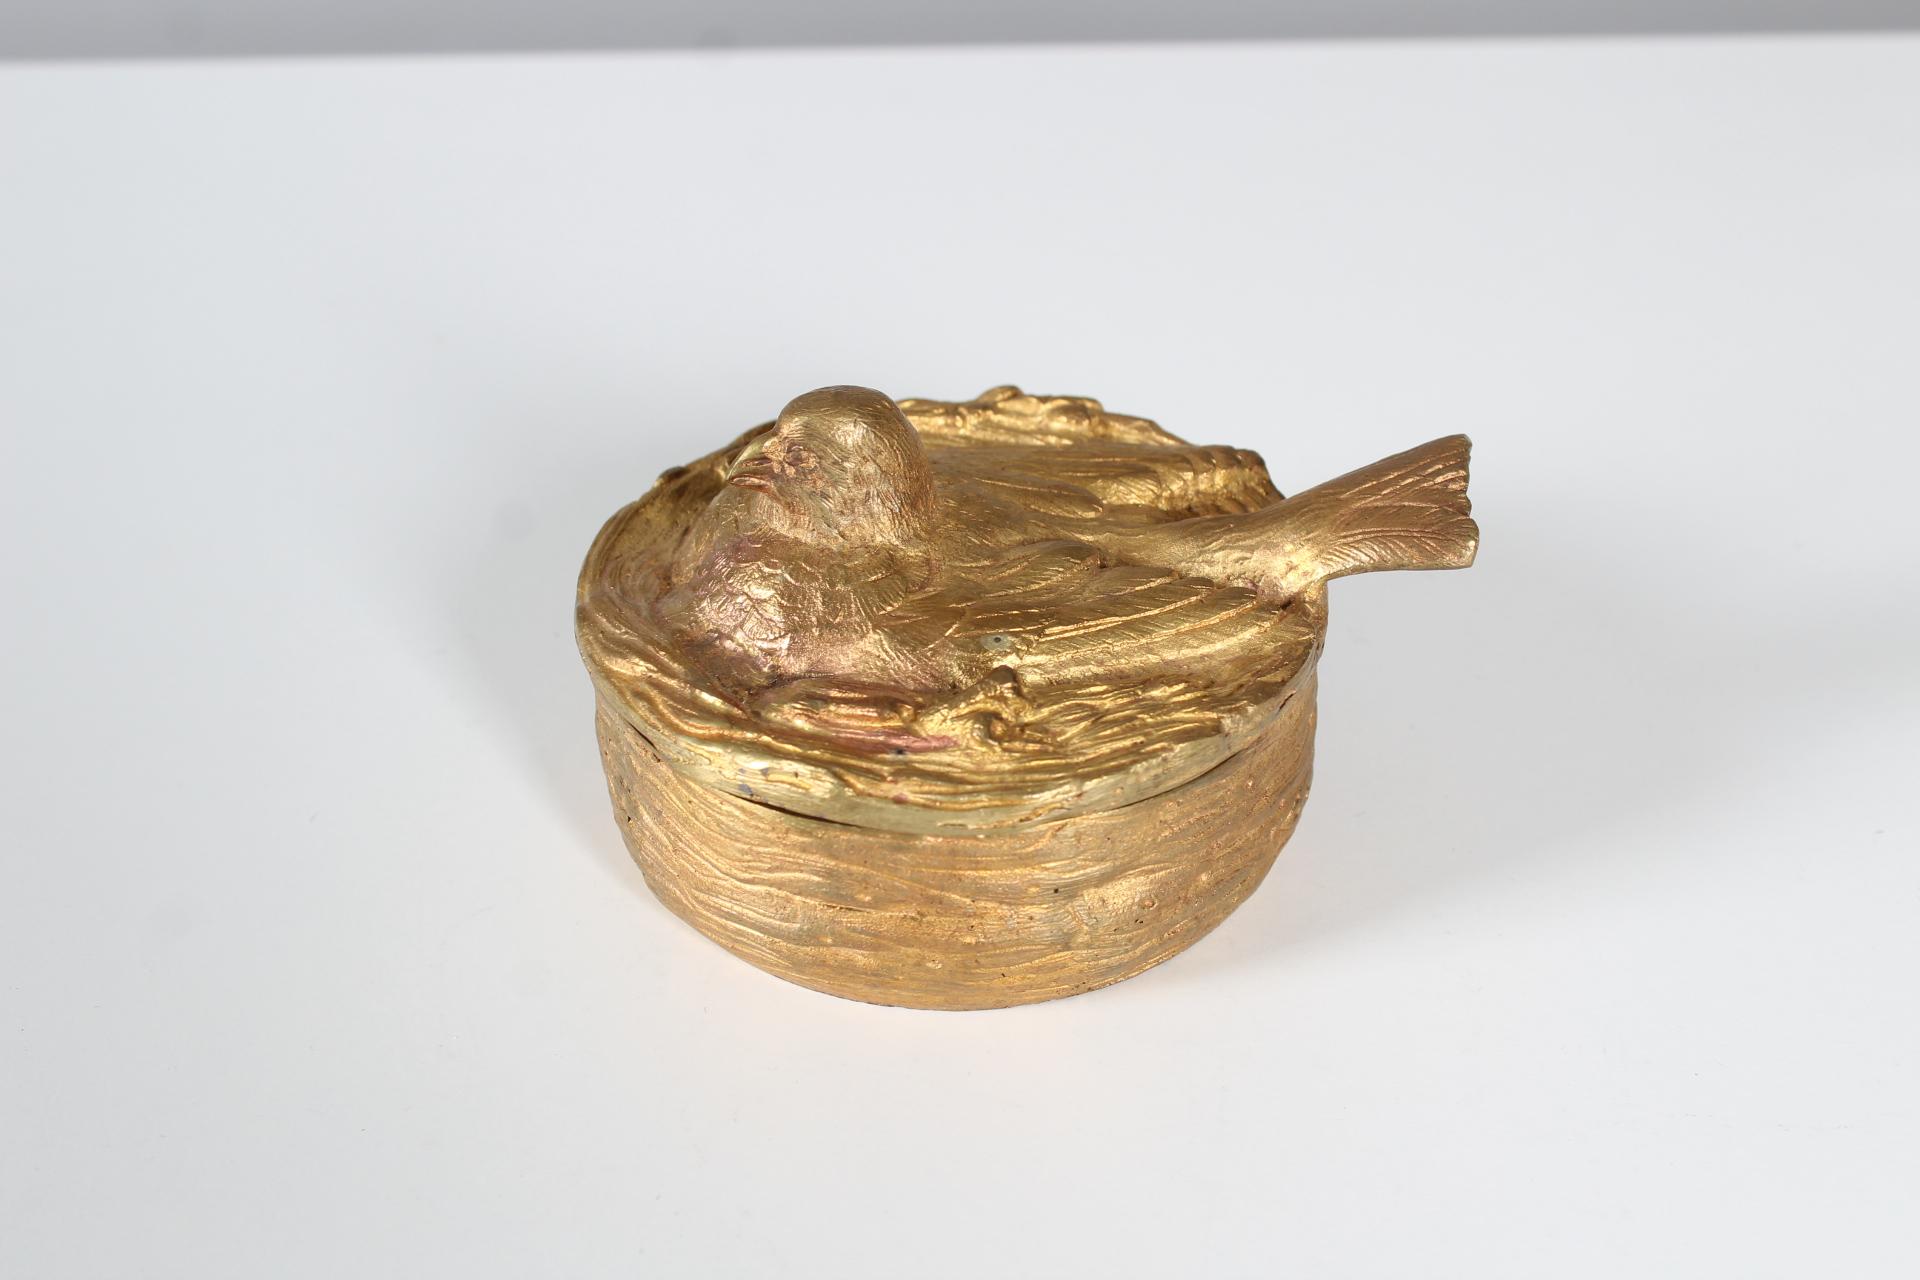 Heavy, high quality bronze work gilded.
Depiction of a bird in a nest.
France, late 19th century.
Can be used wonderfully as a jewelry box.

.